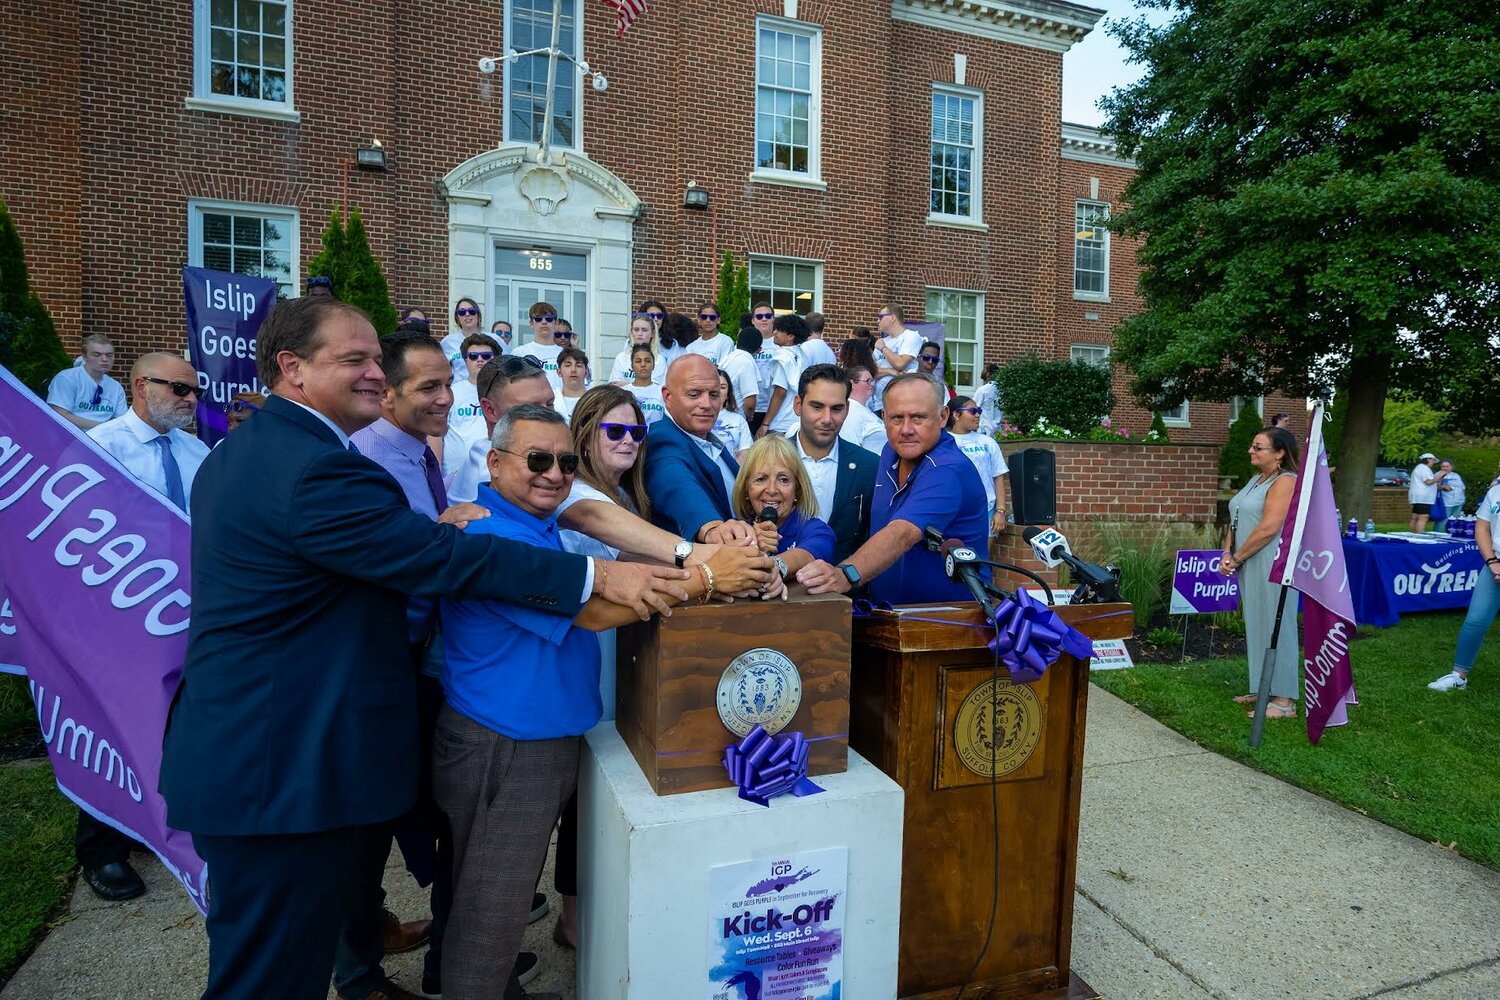 Angie Carpenter and others turn on the switch to make Town Hall purple.